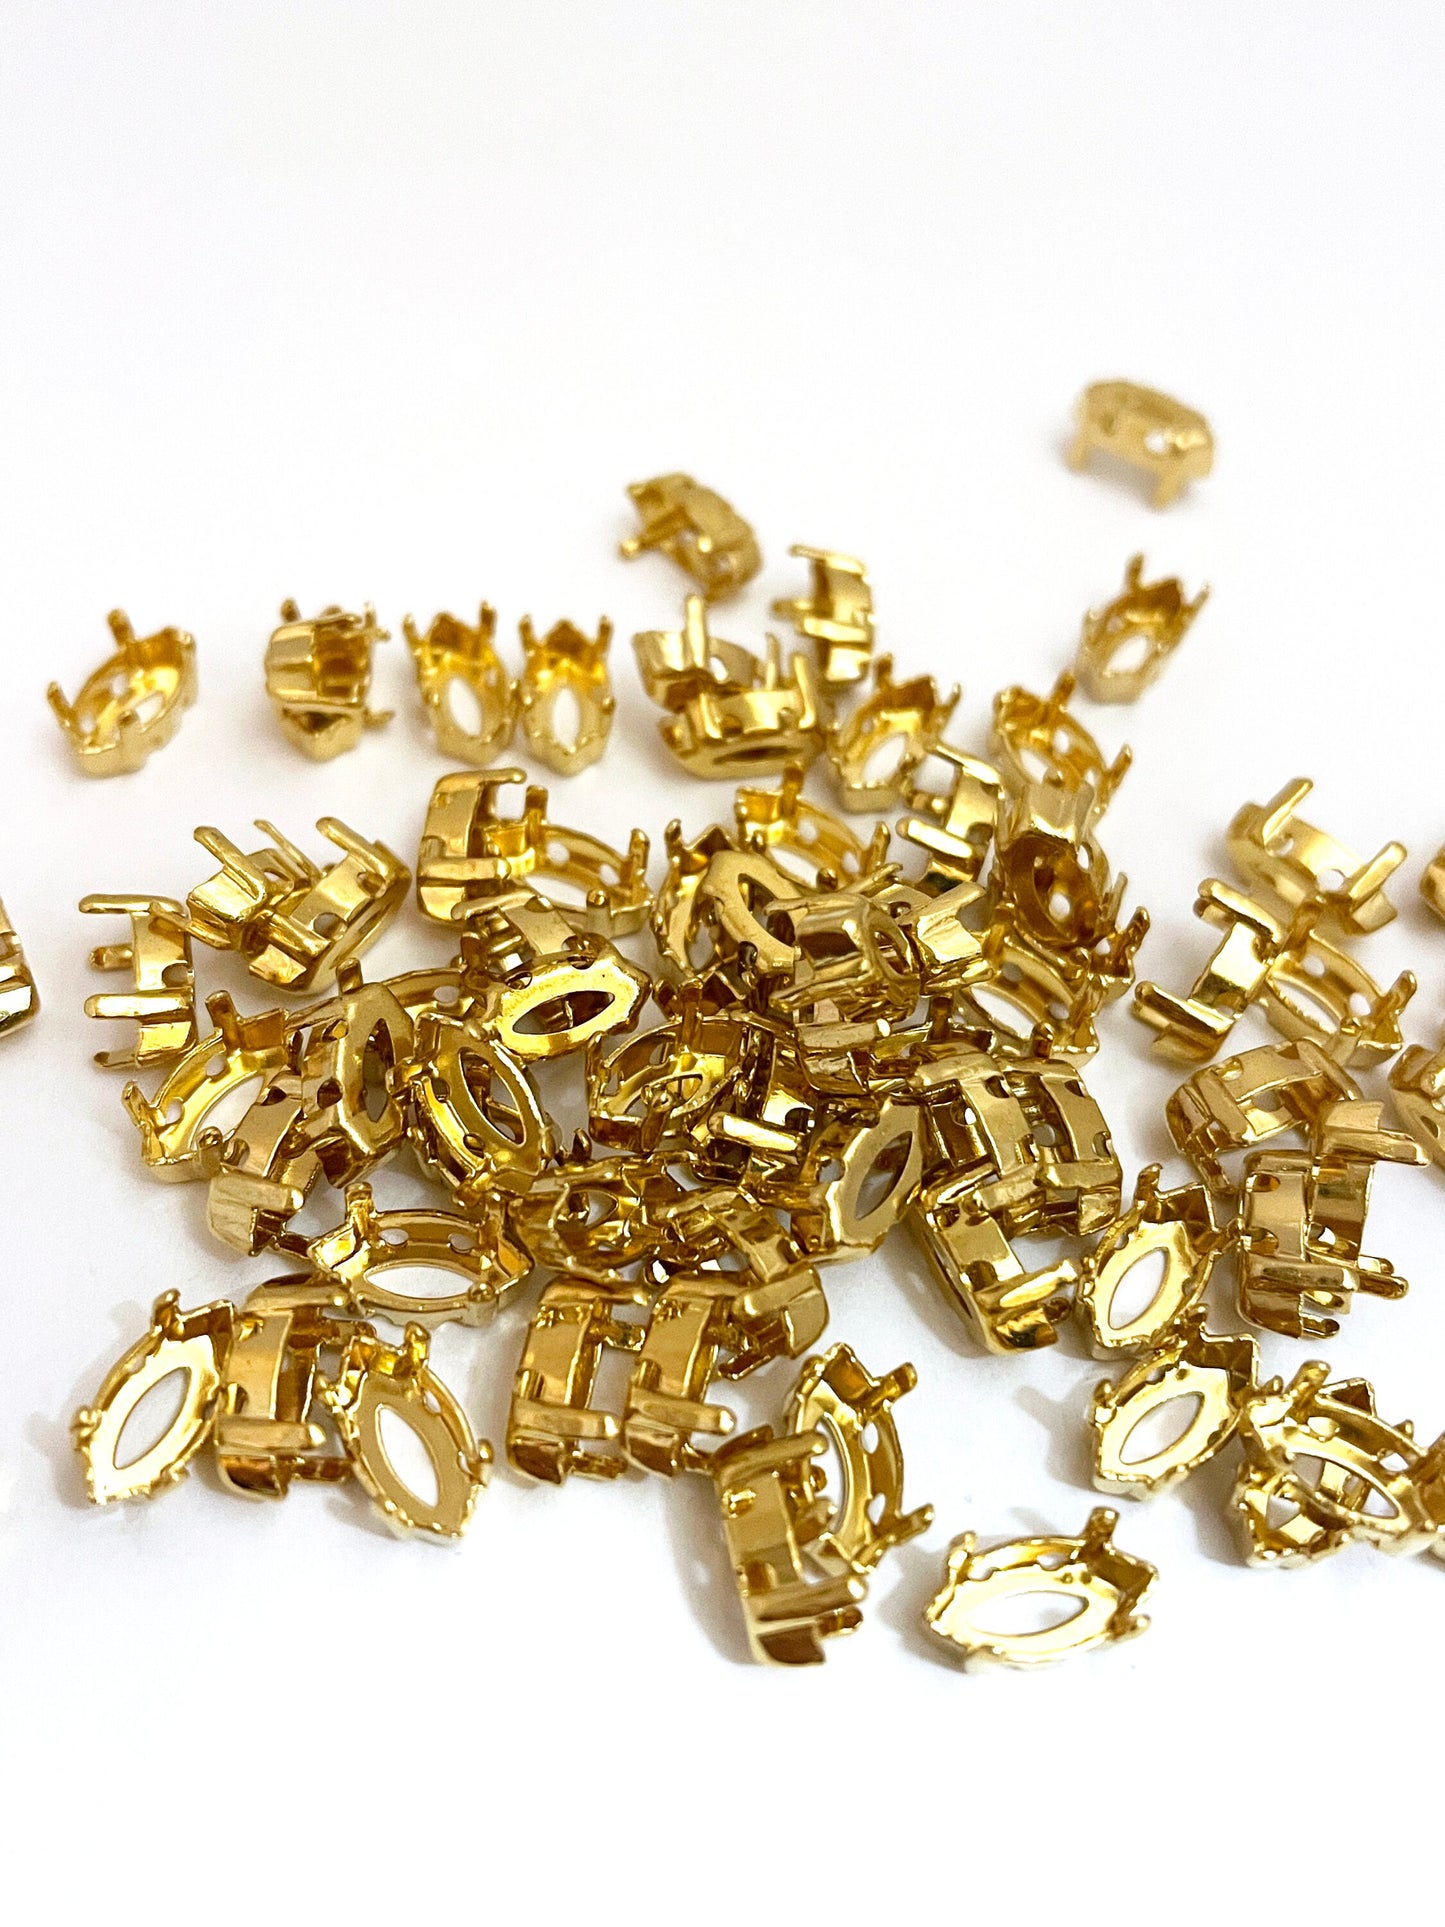 50 pieces Gold Plated Sew On Navette with Open Back for 10x5mm